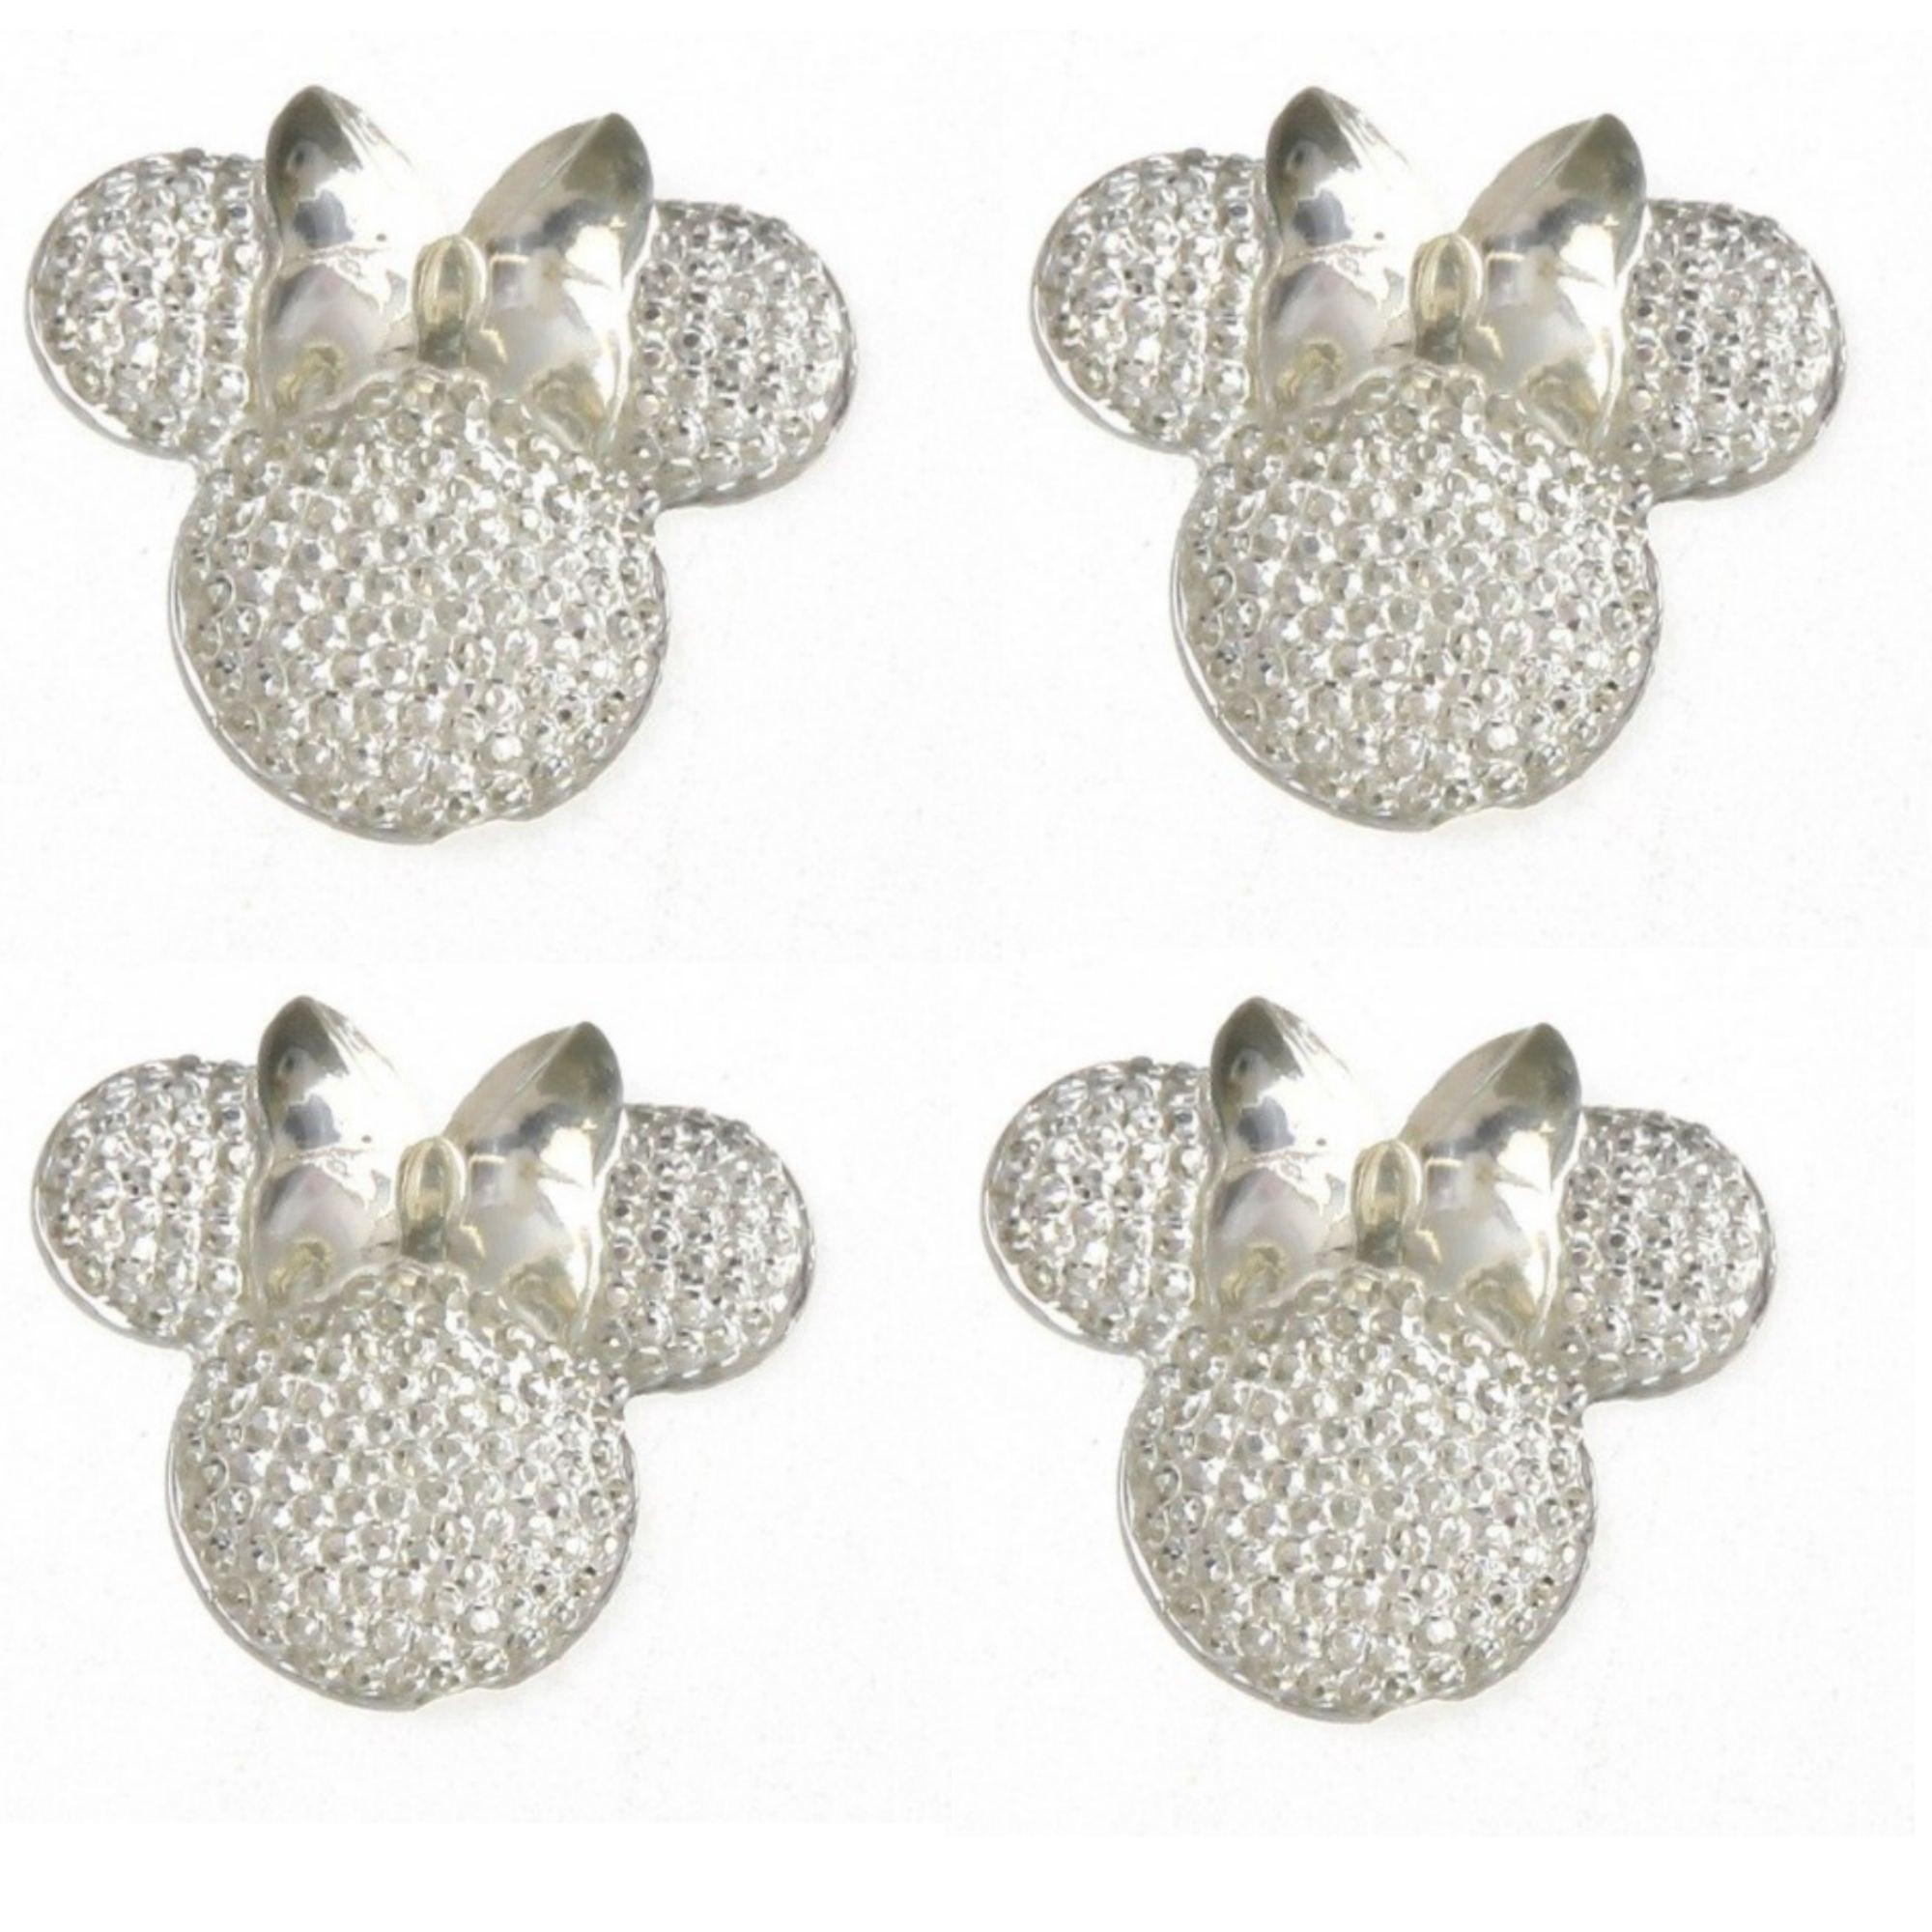 Disneyana Collection 1" Bling White Mouse Ears & Bow Scrapbook Embellishments - 4 Pieces - Scrapbook Supply Companies